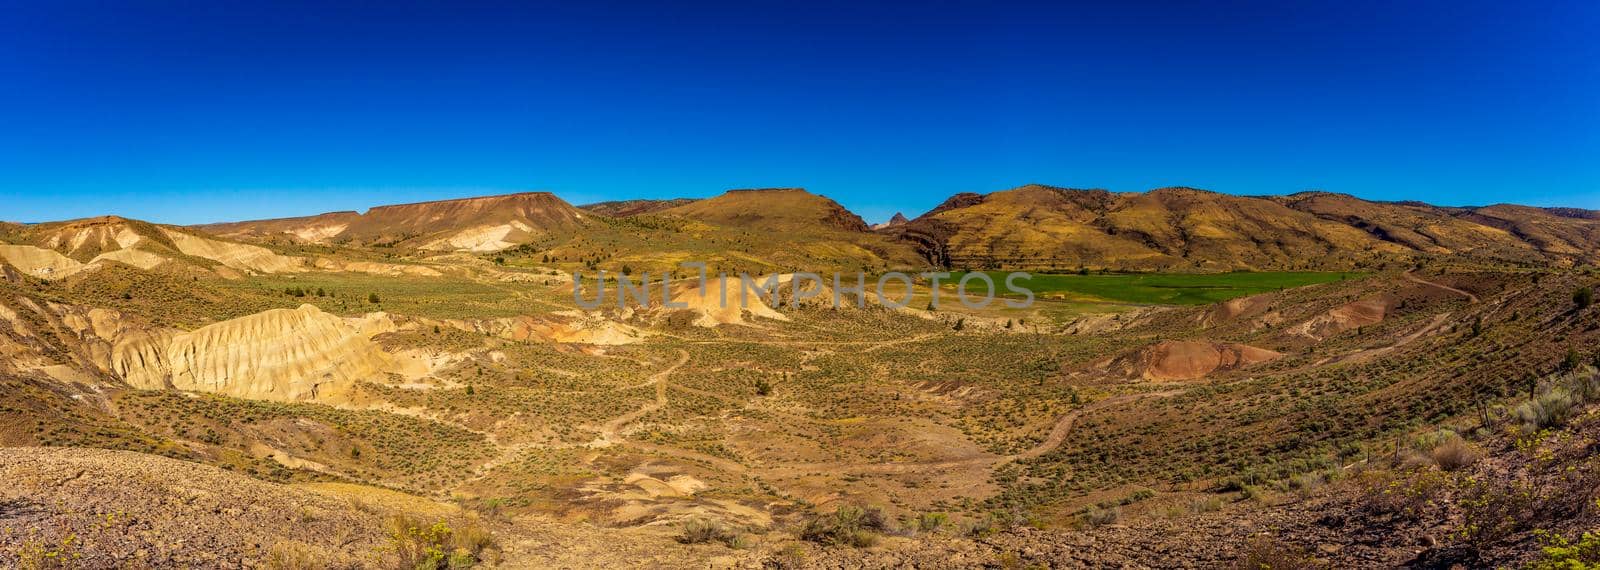 Panorama view from Mascall overlook of Mascall Formation at John Day Fossil Beds Natonal Monument, Oregon.